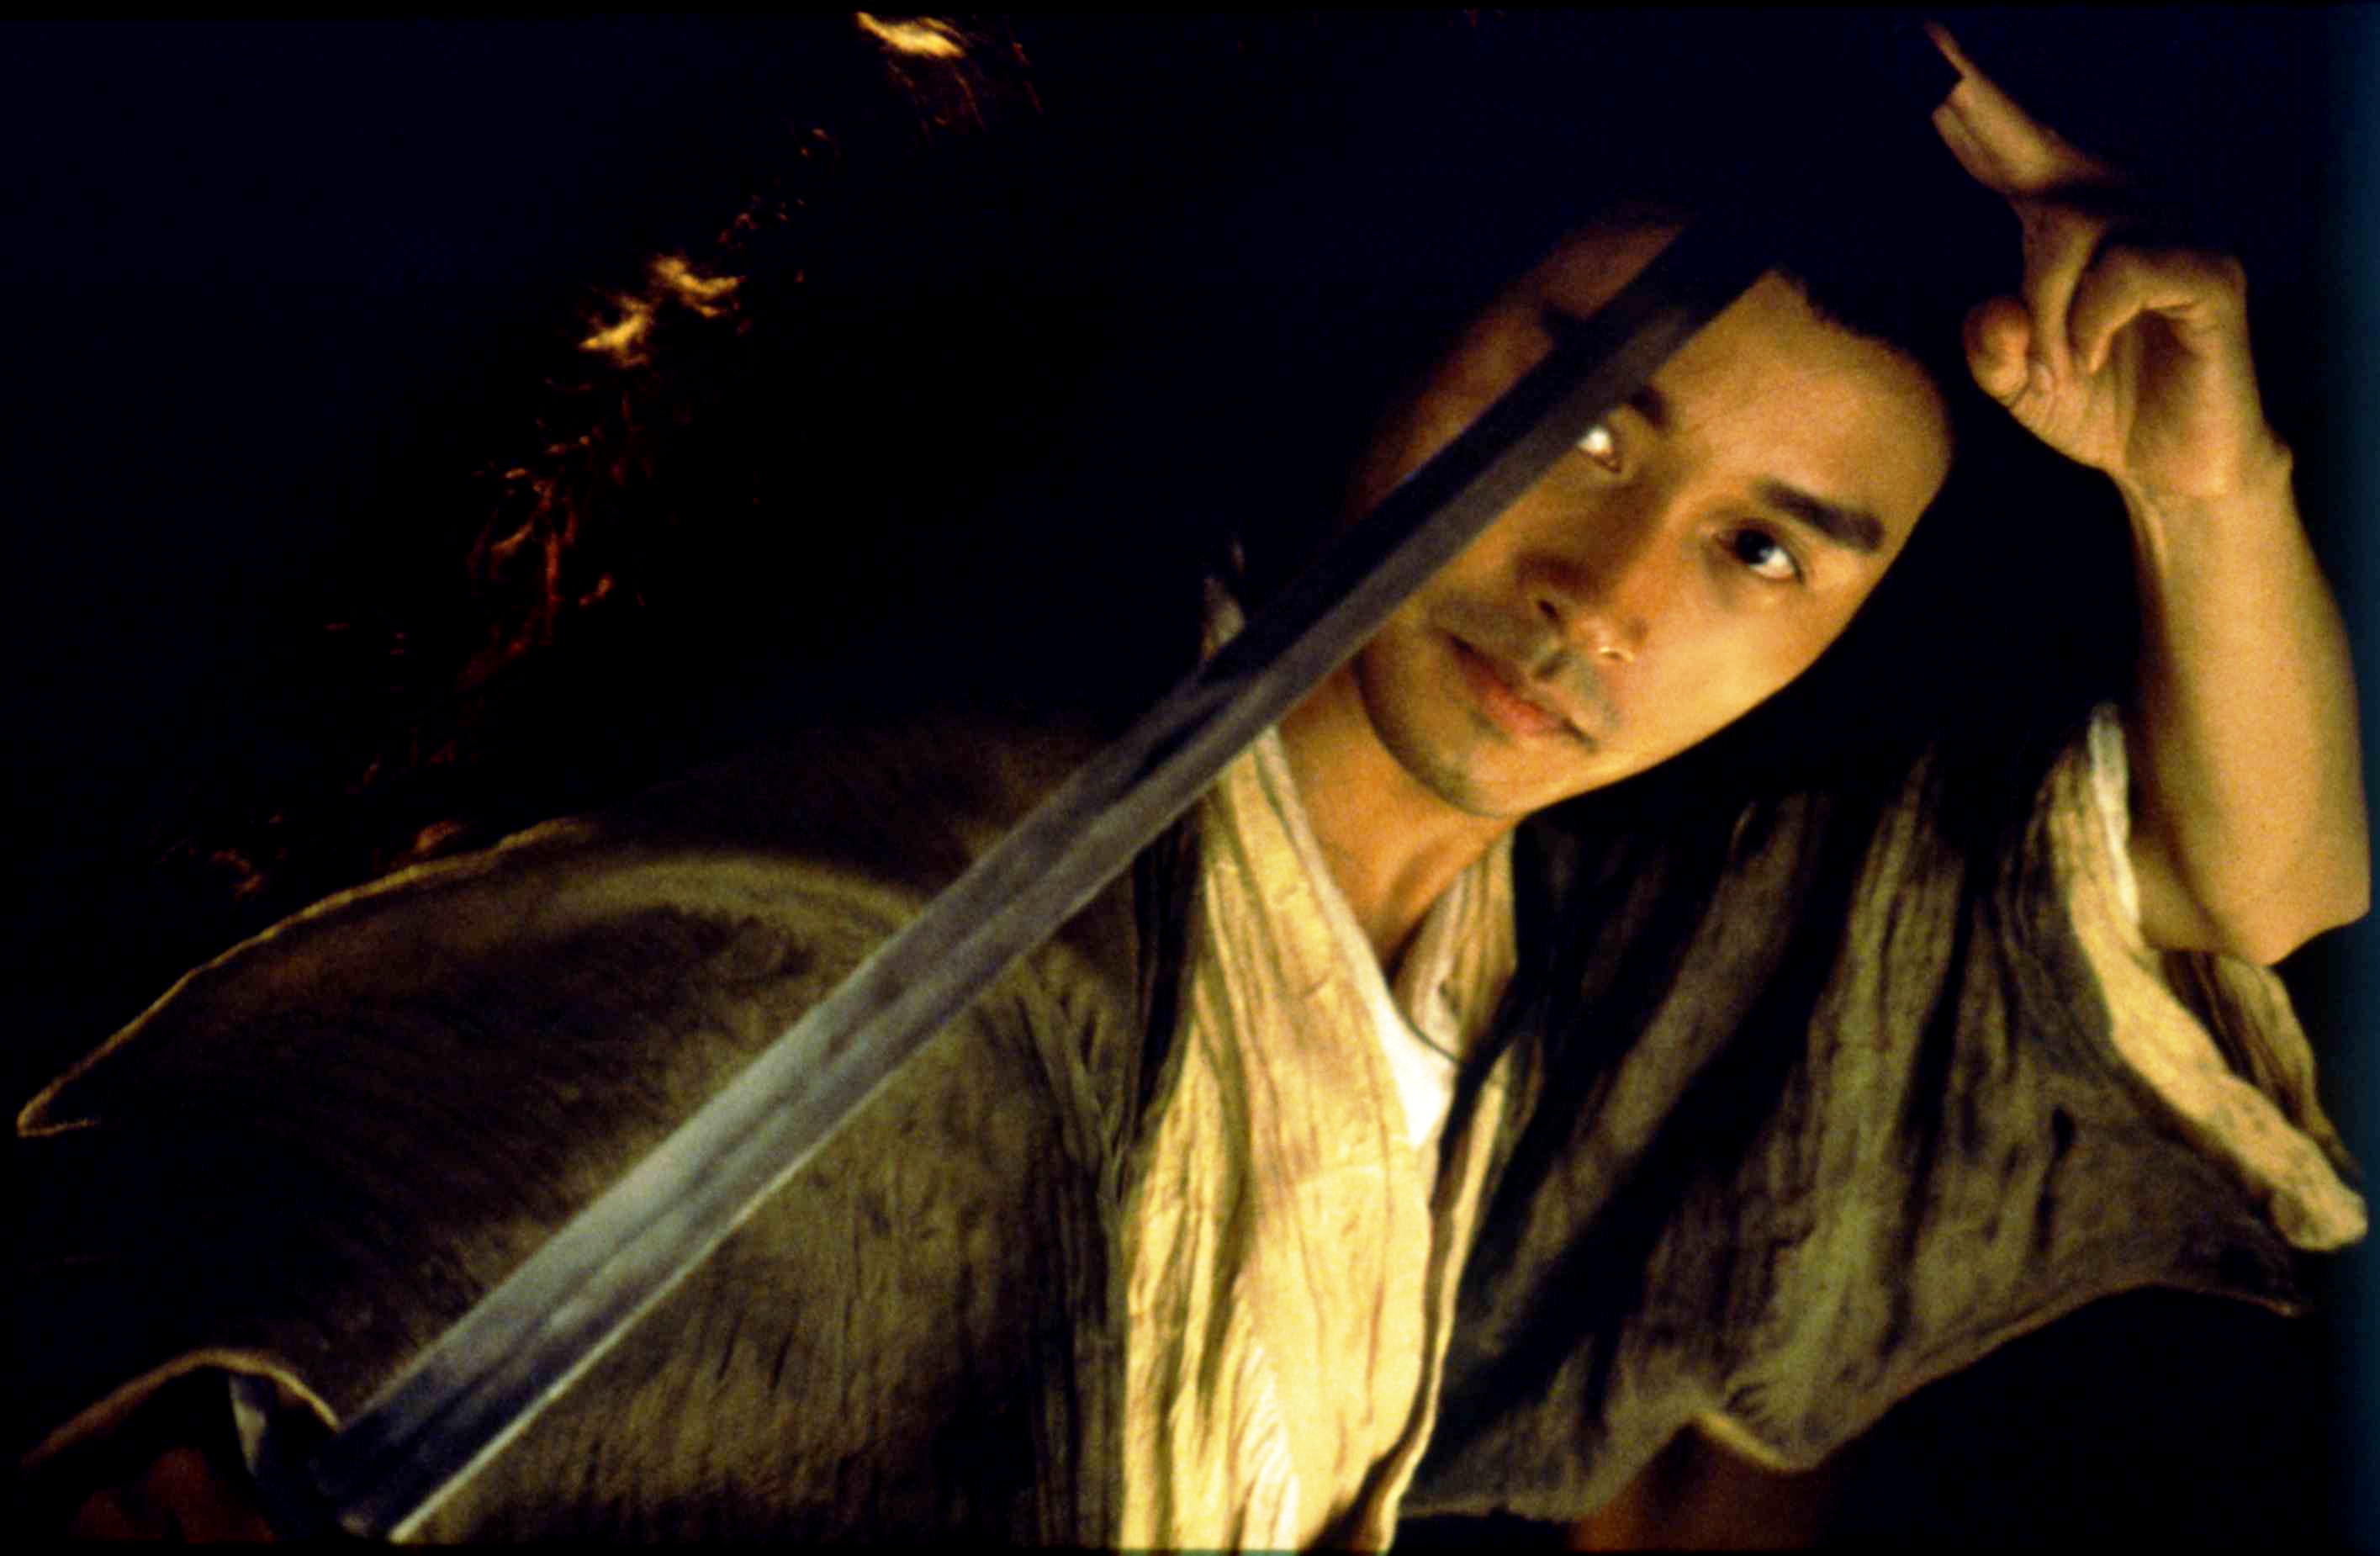 Tony Leung Chiu Wai stars as Blind Swordsman in Sony Pictures Classics' Ashes of Time Redux (2008)